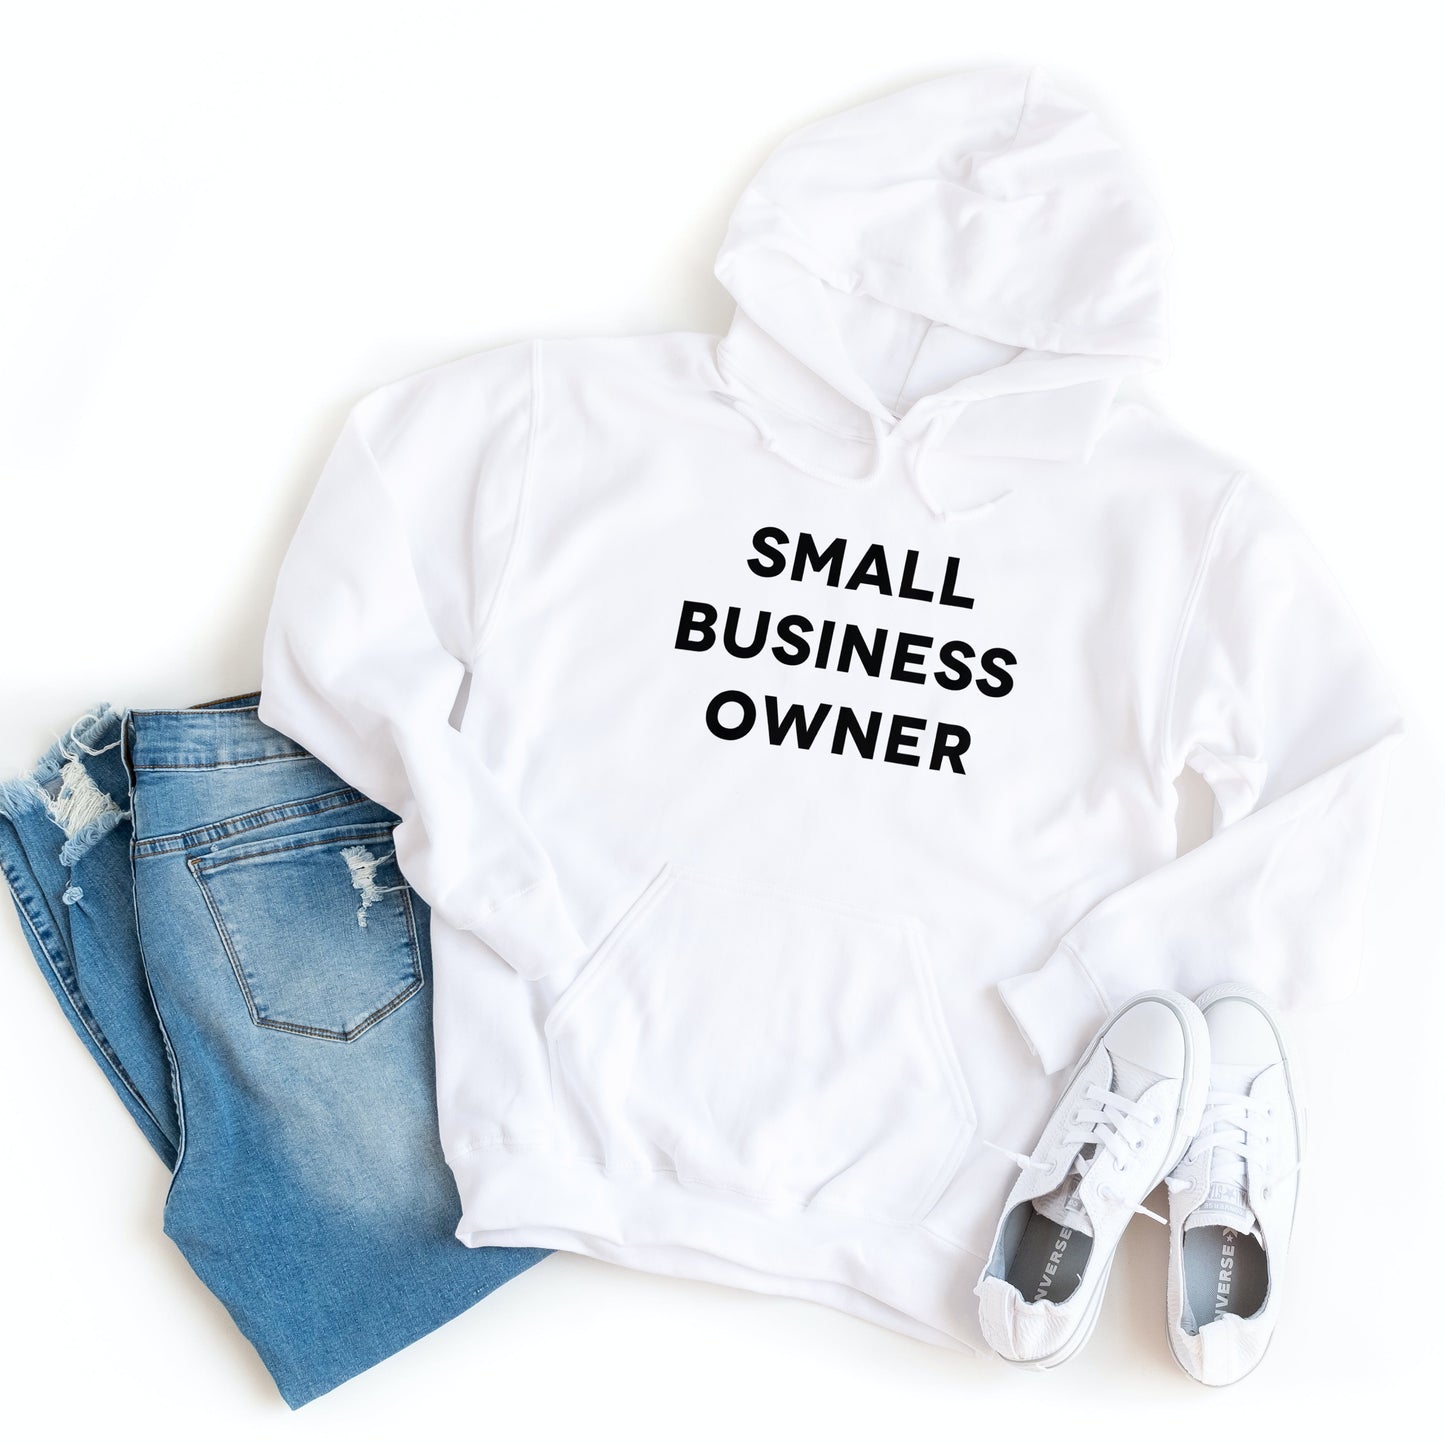 Small Business Owner - Hoodie